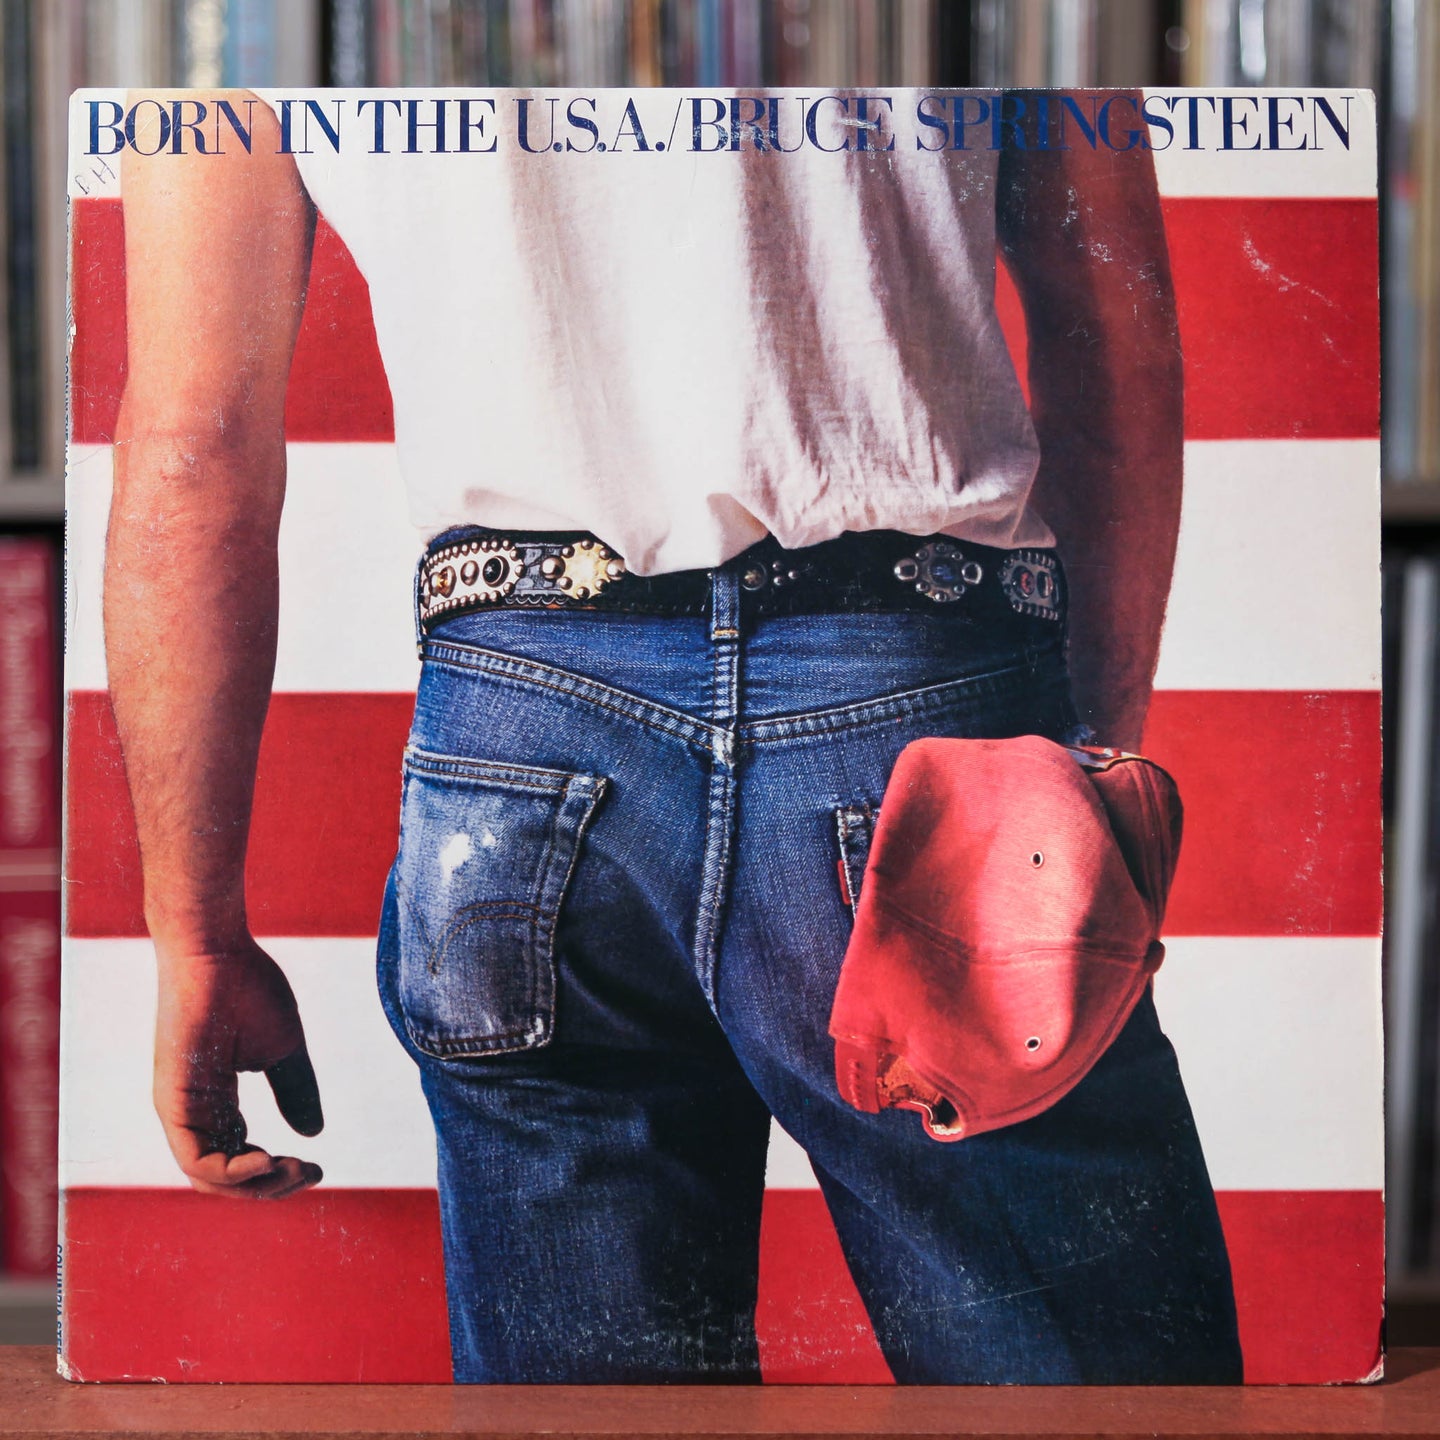 Bruce Springsteen - Born In The U.S.A. - 1984  Columbia, VG/VG+